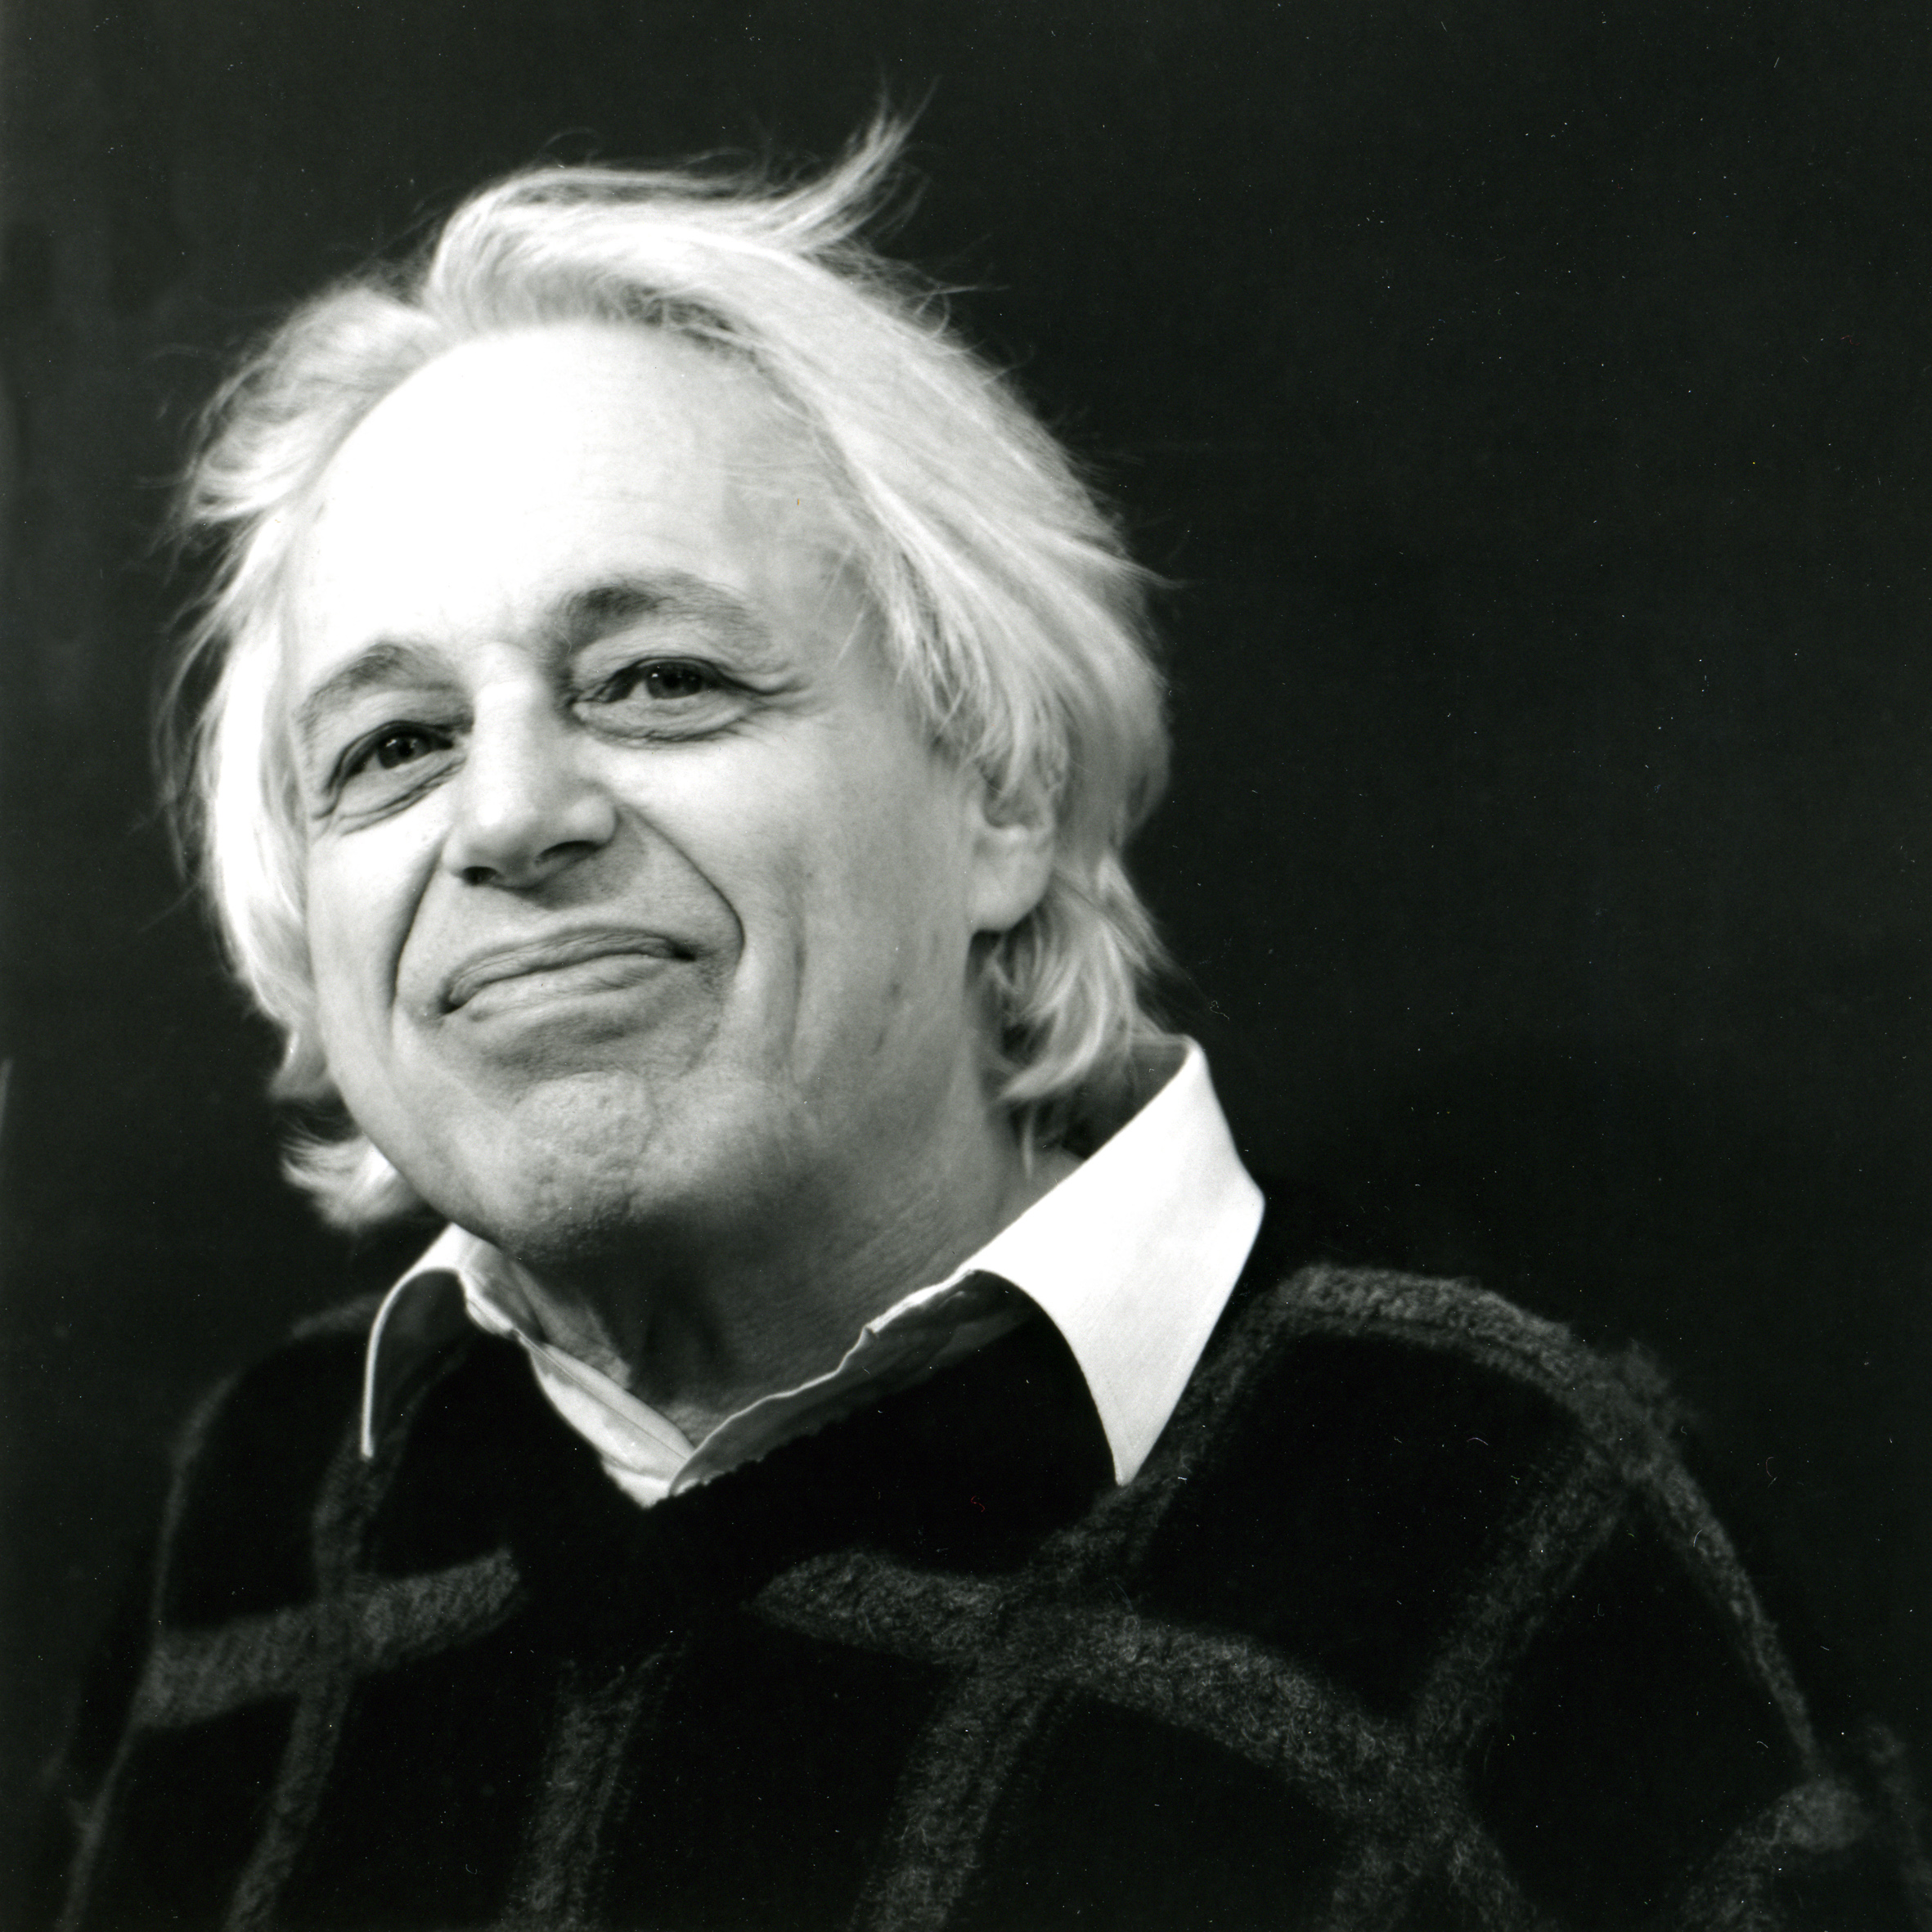 Gyorgy Ligeti, a smiling person with feathery white hair, black sweater with while collar